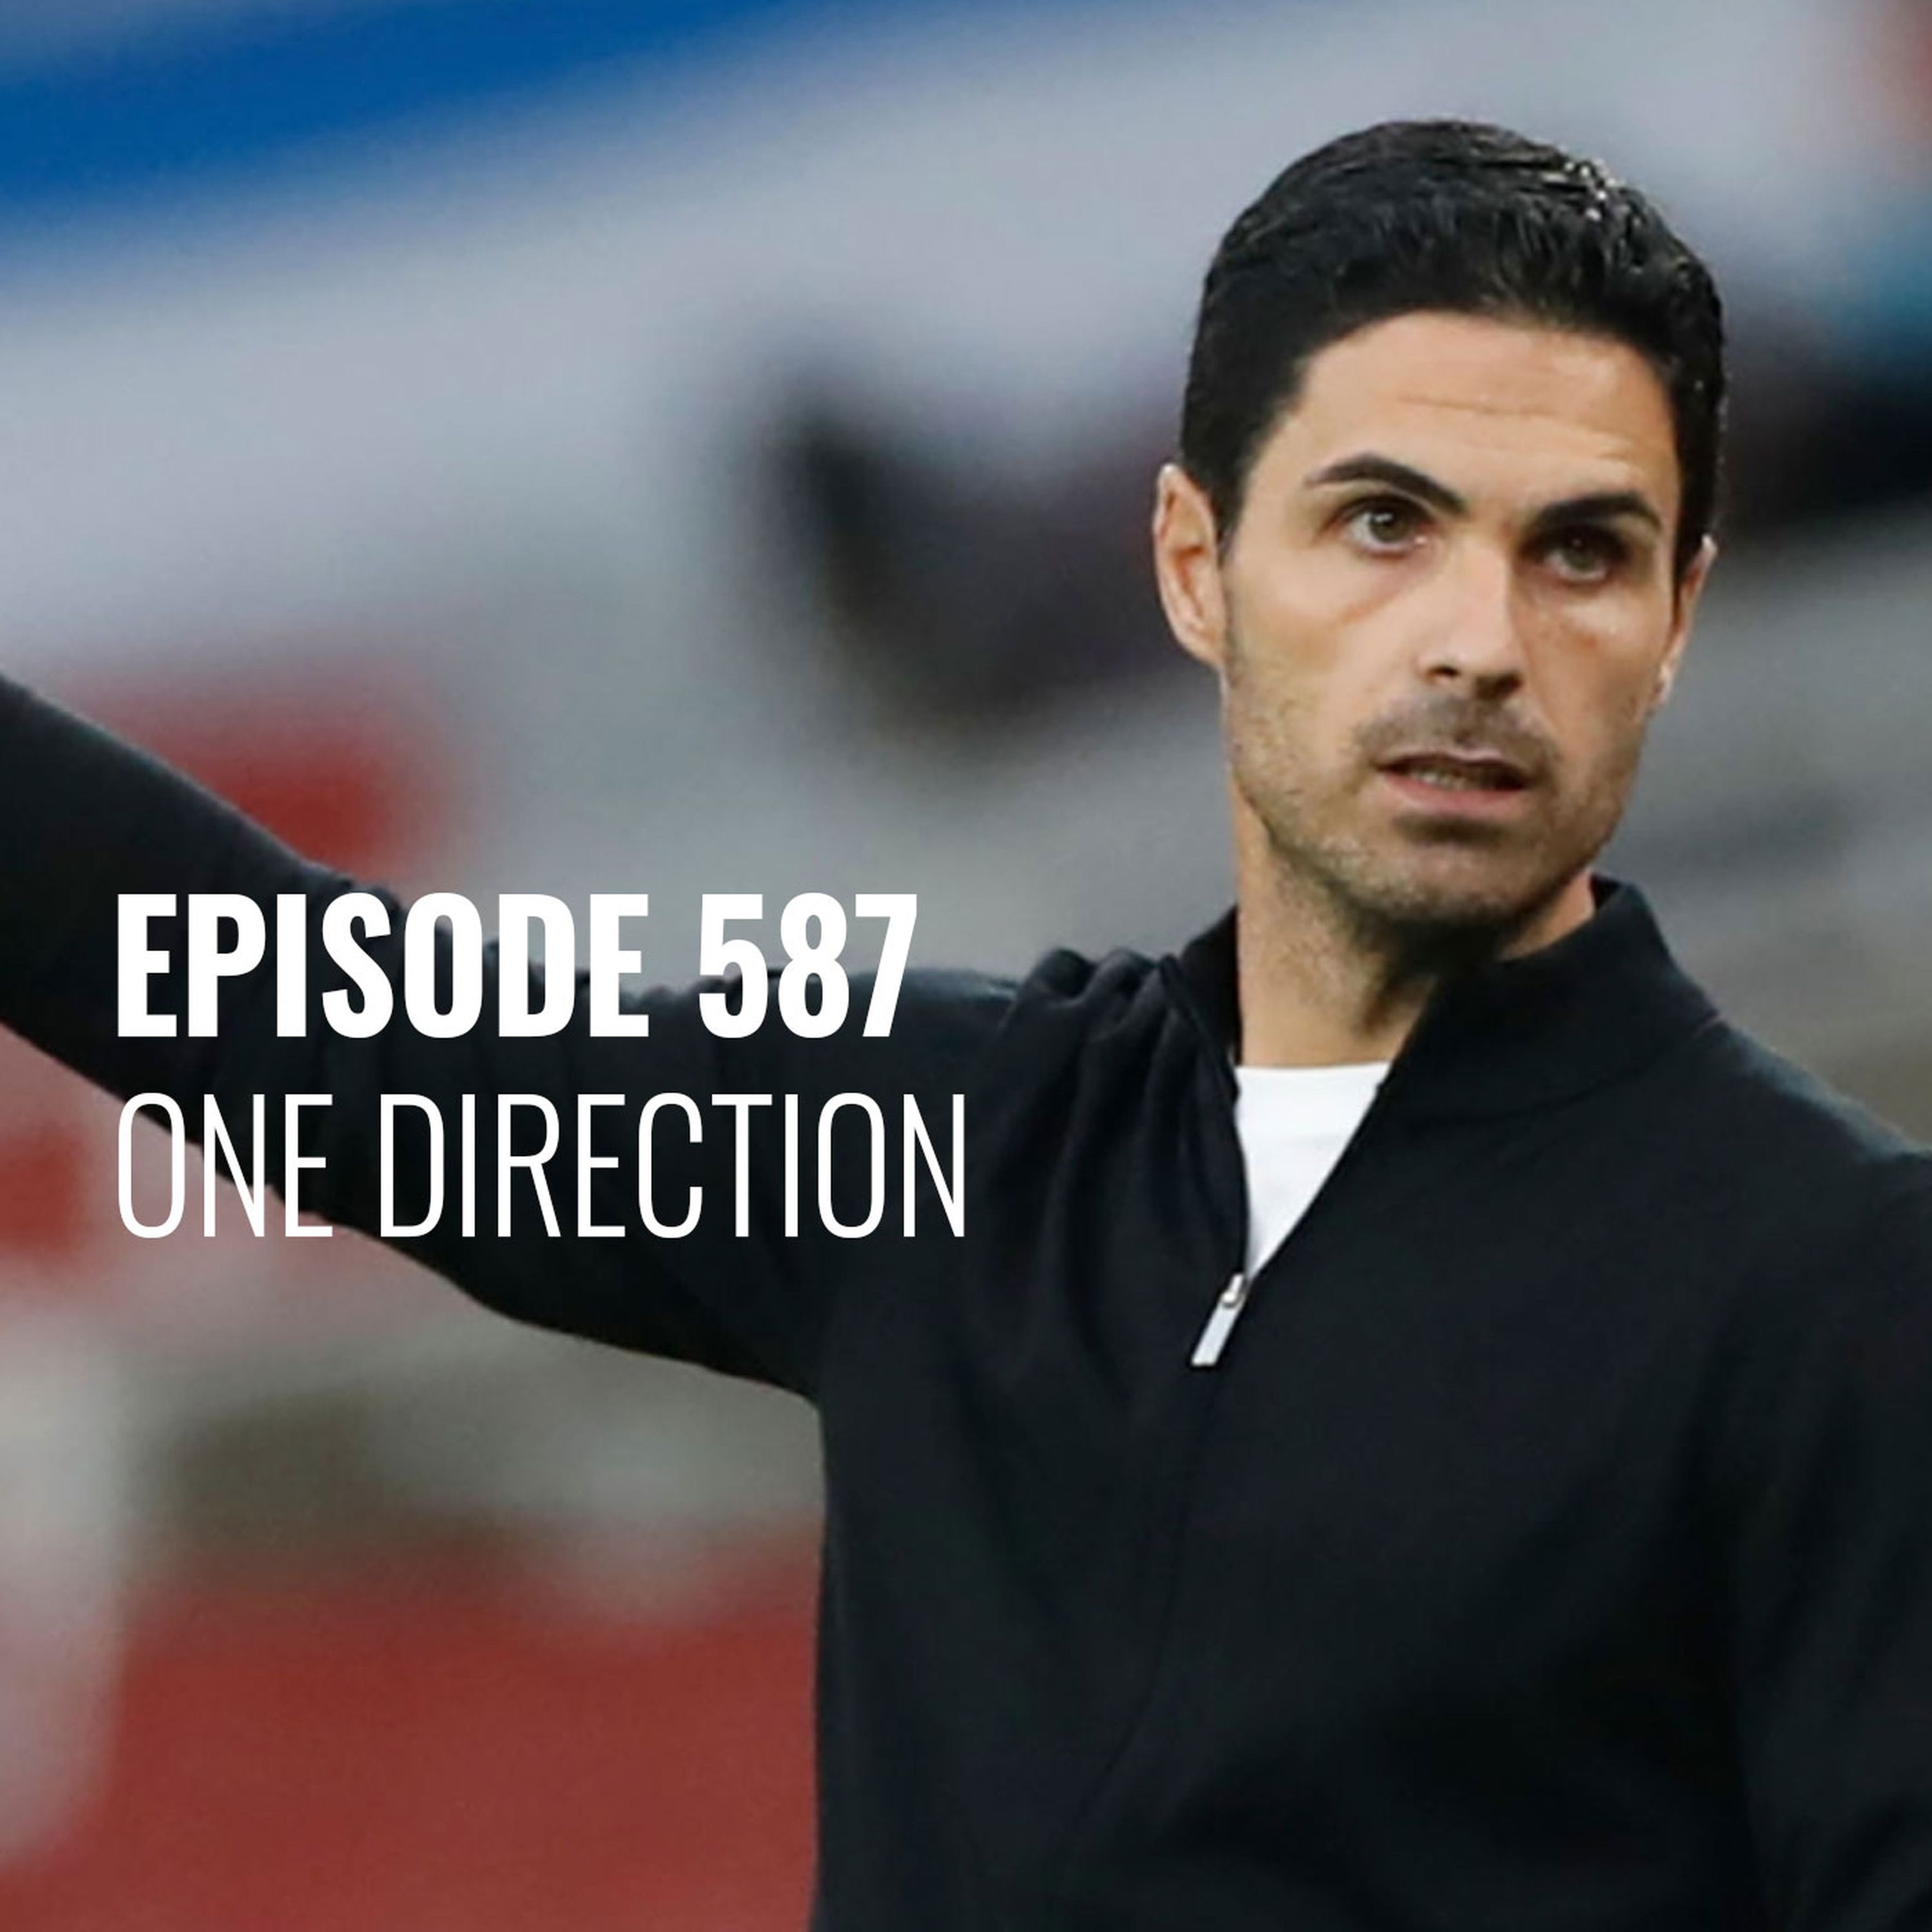 Episode 587 - One Direction